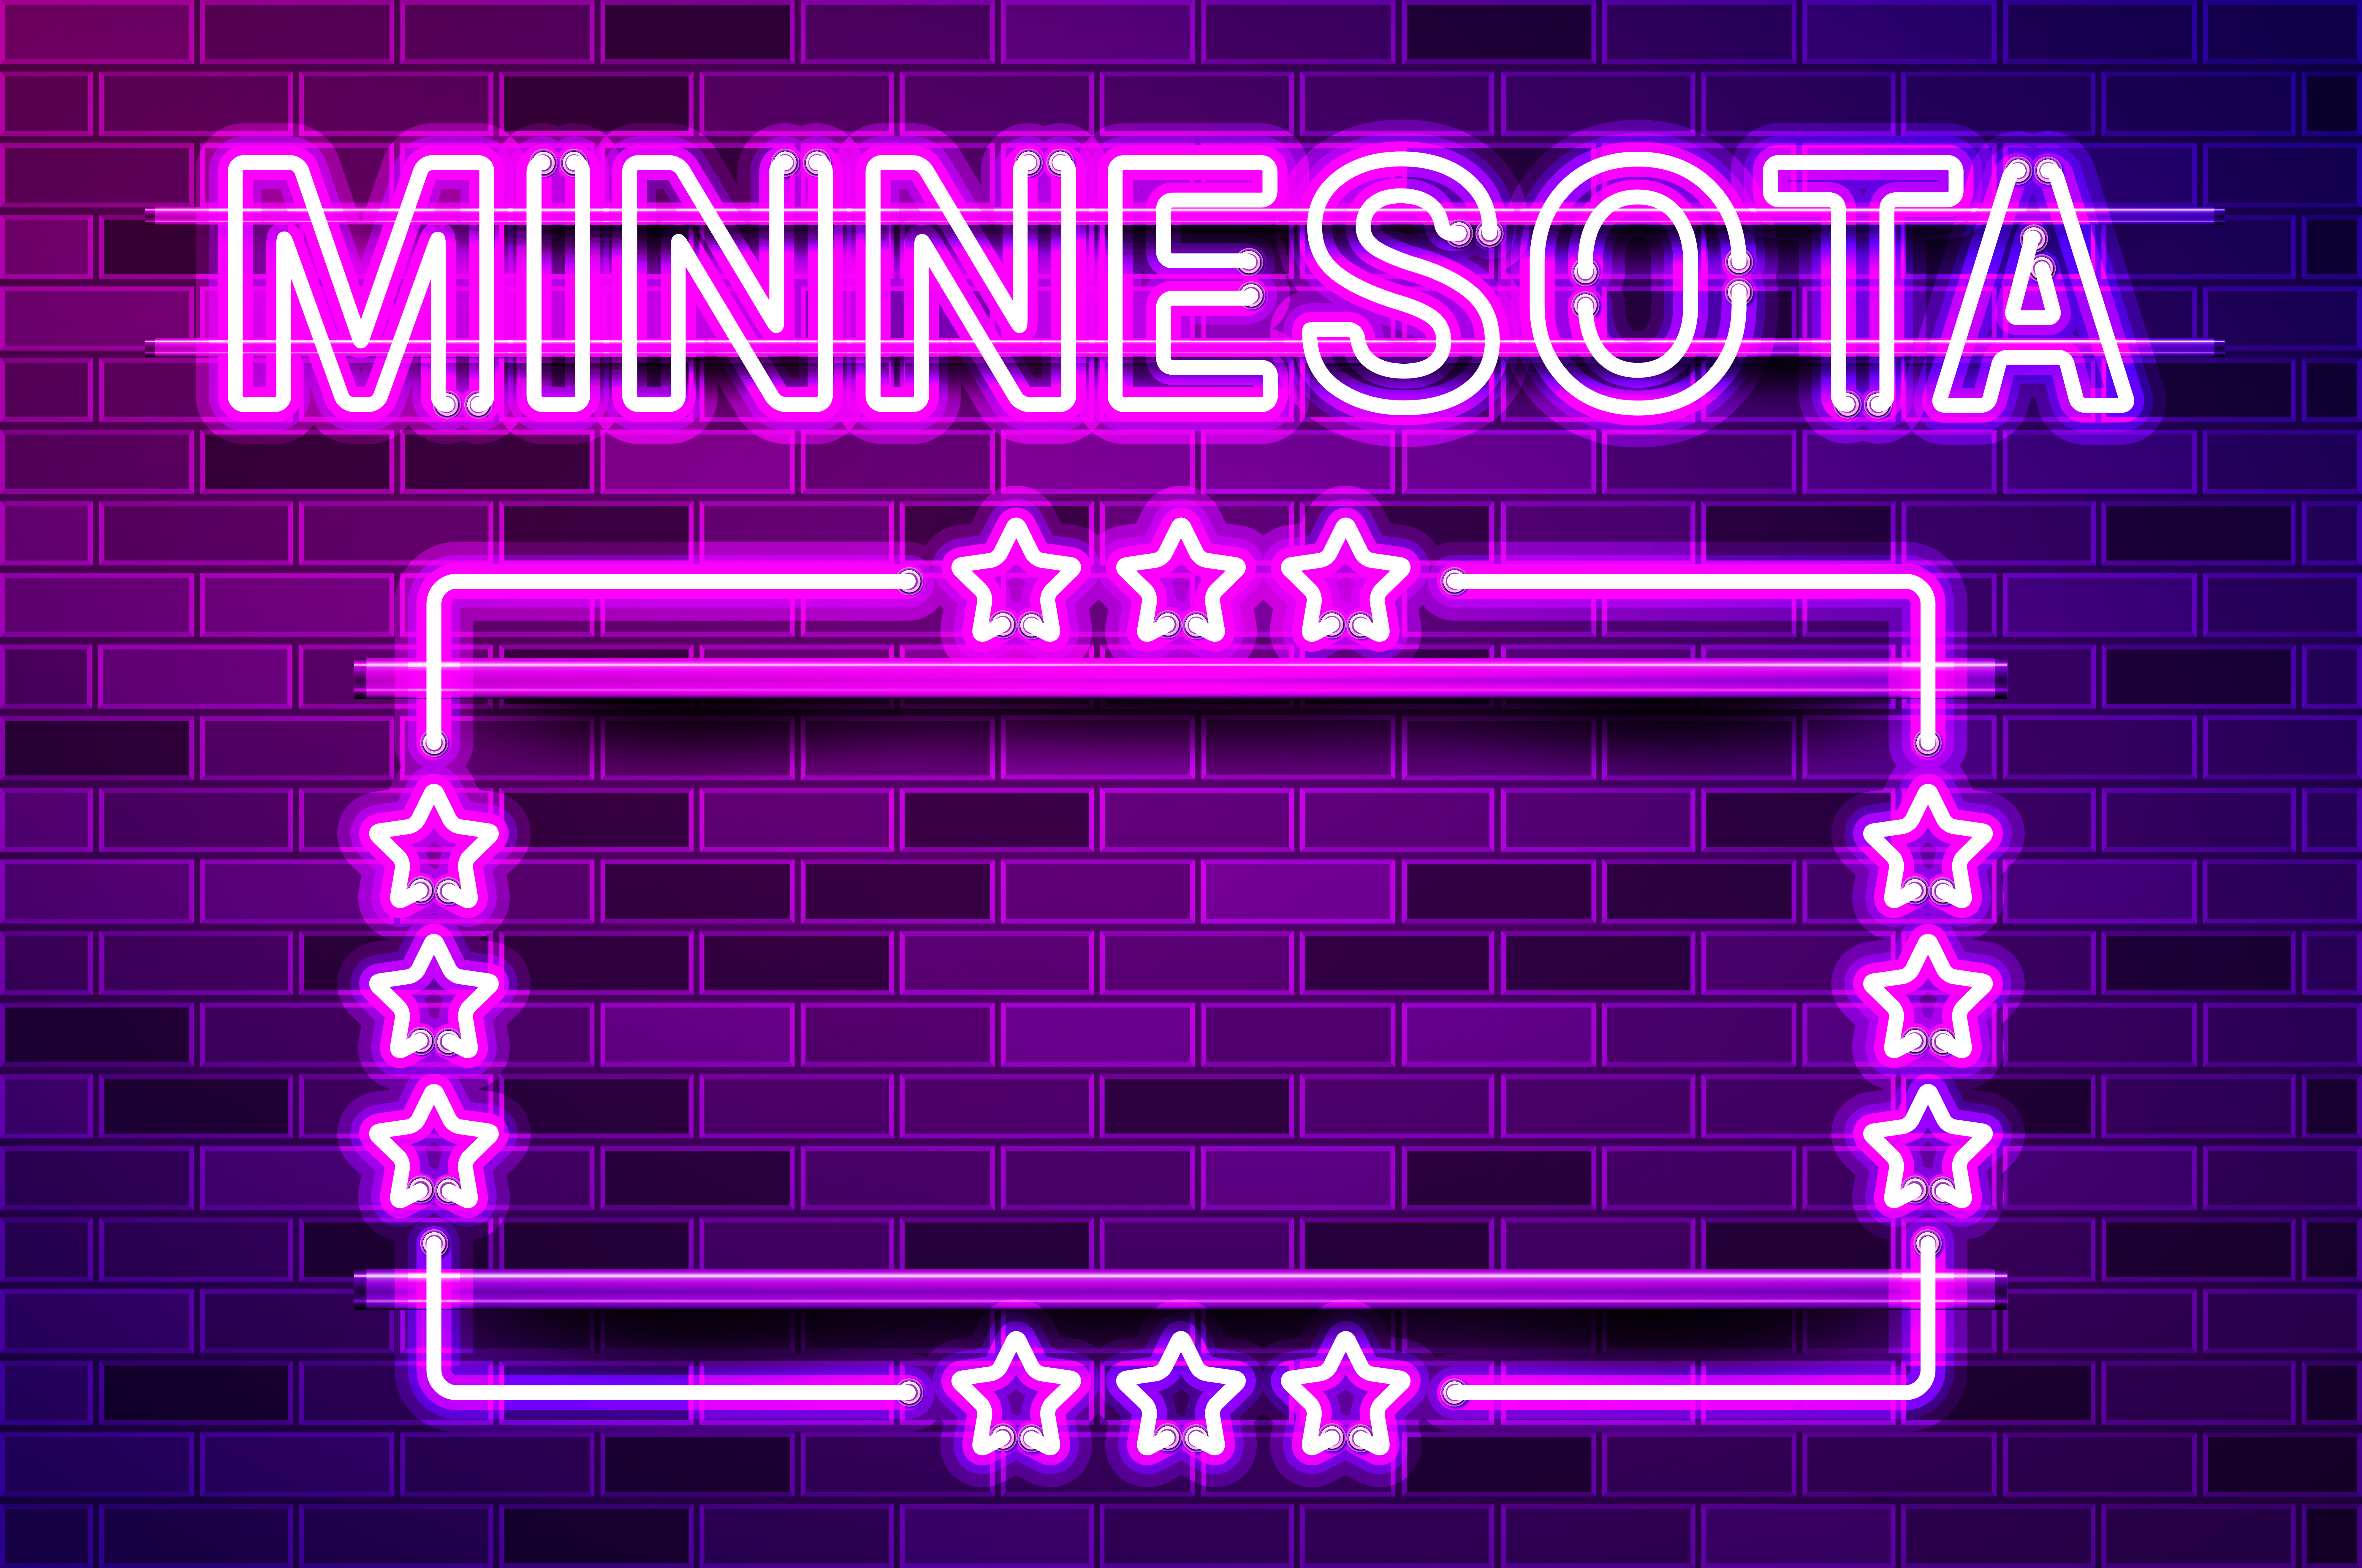 Minnesota US State glowing purple neon lettering and a rectangular frame with stars. Realistic vector illustration. Purple brick wall, violet glow, metal holders.. Minnesota US State glowing purple neon lettering and a rectangular frame with stars